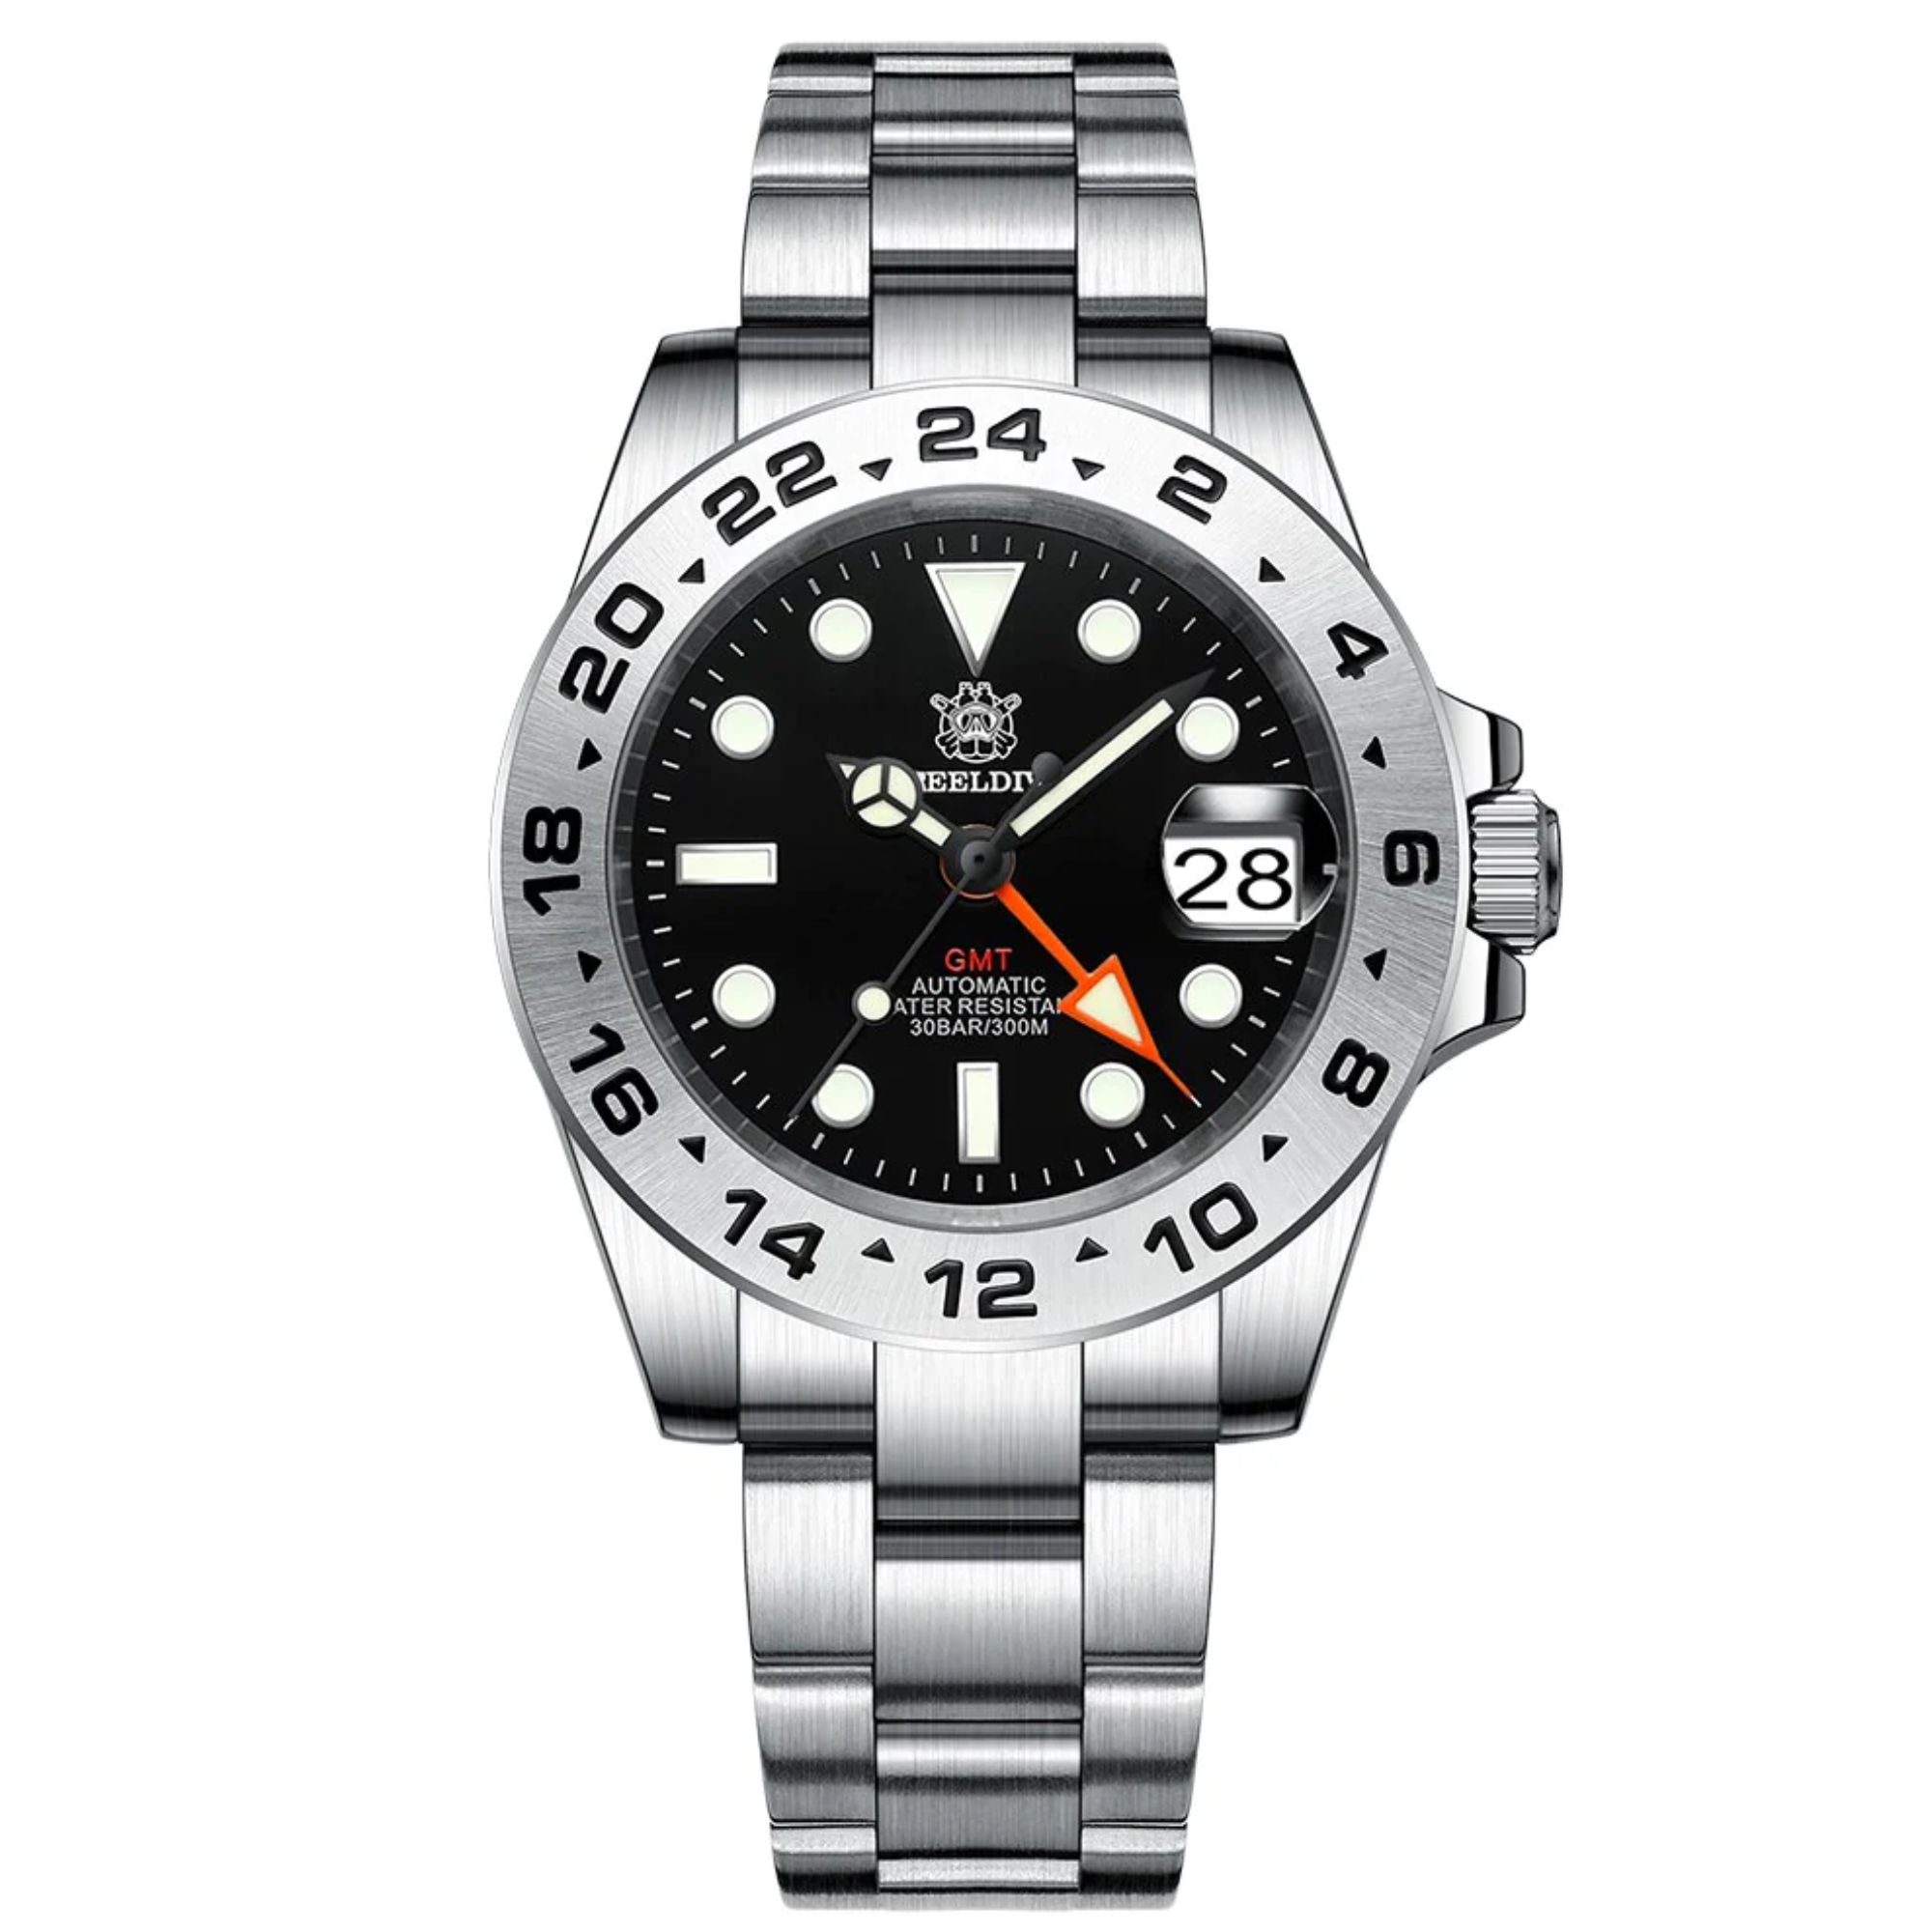 Steeldive SD1992 NH34 GMT Automatic Watch - Black Dial